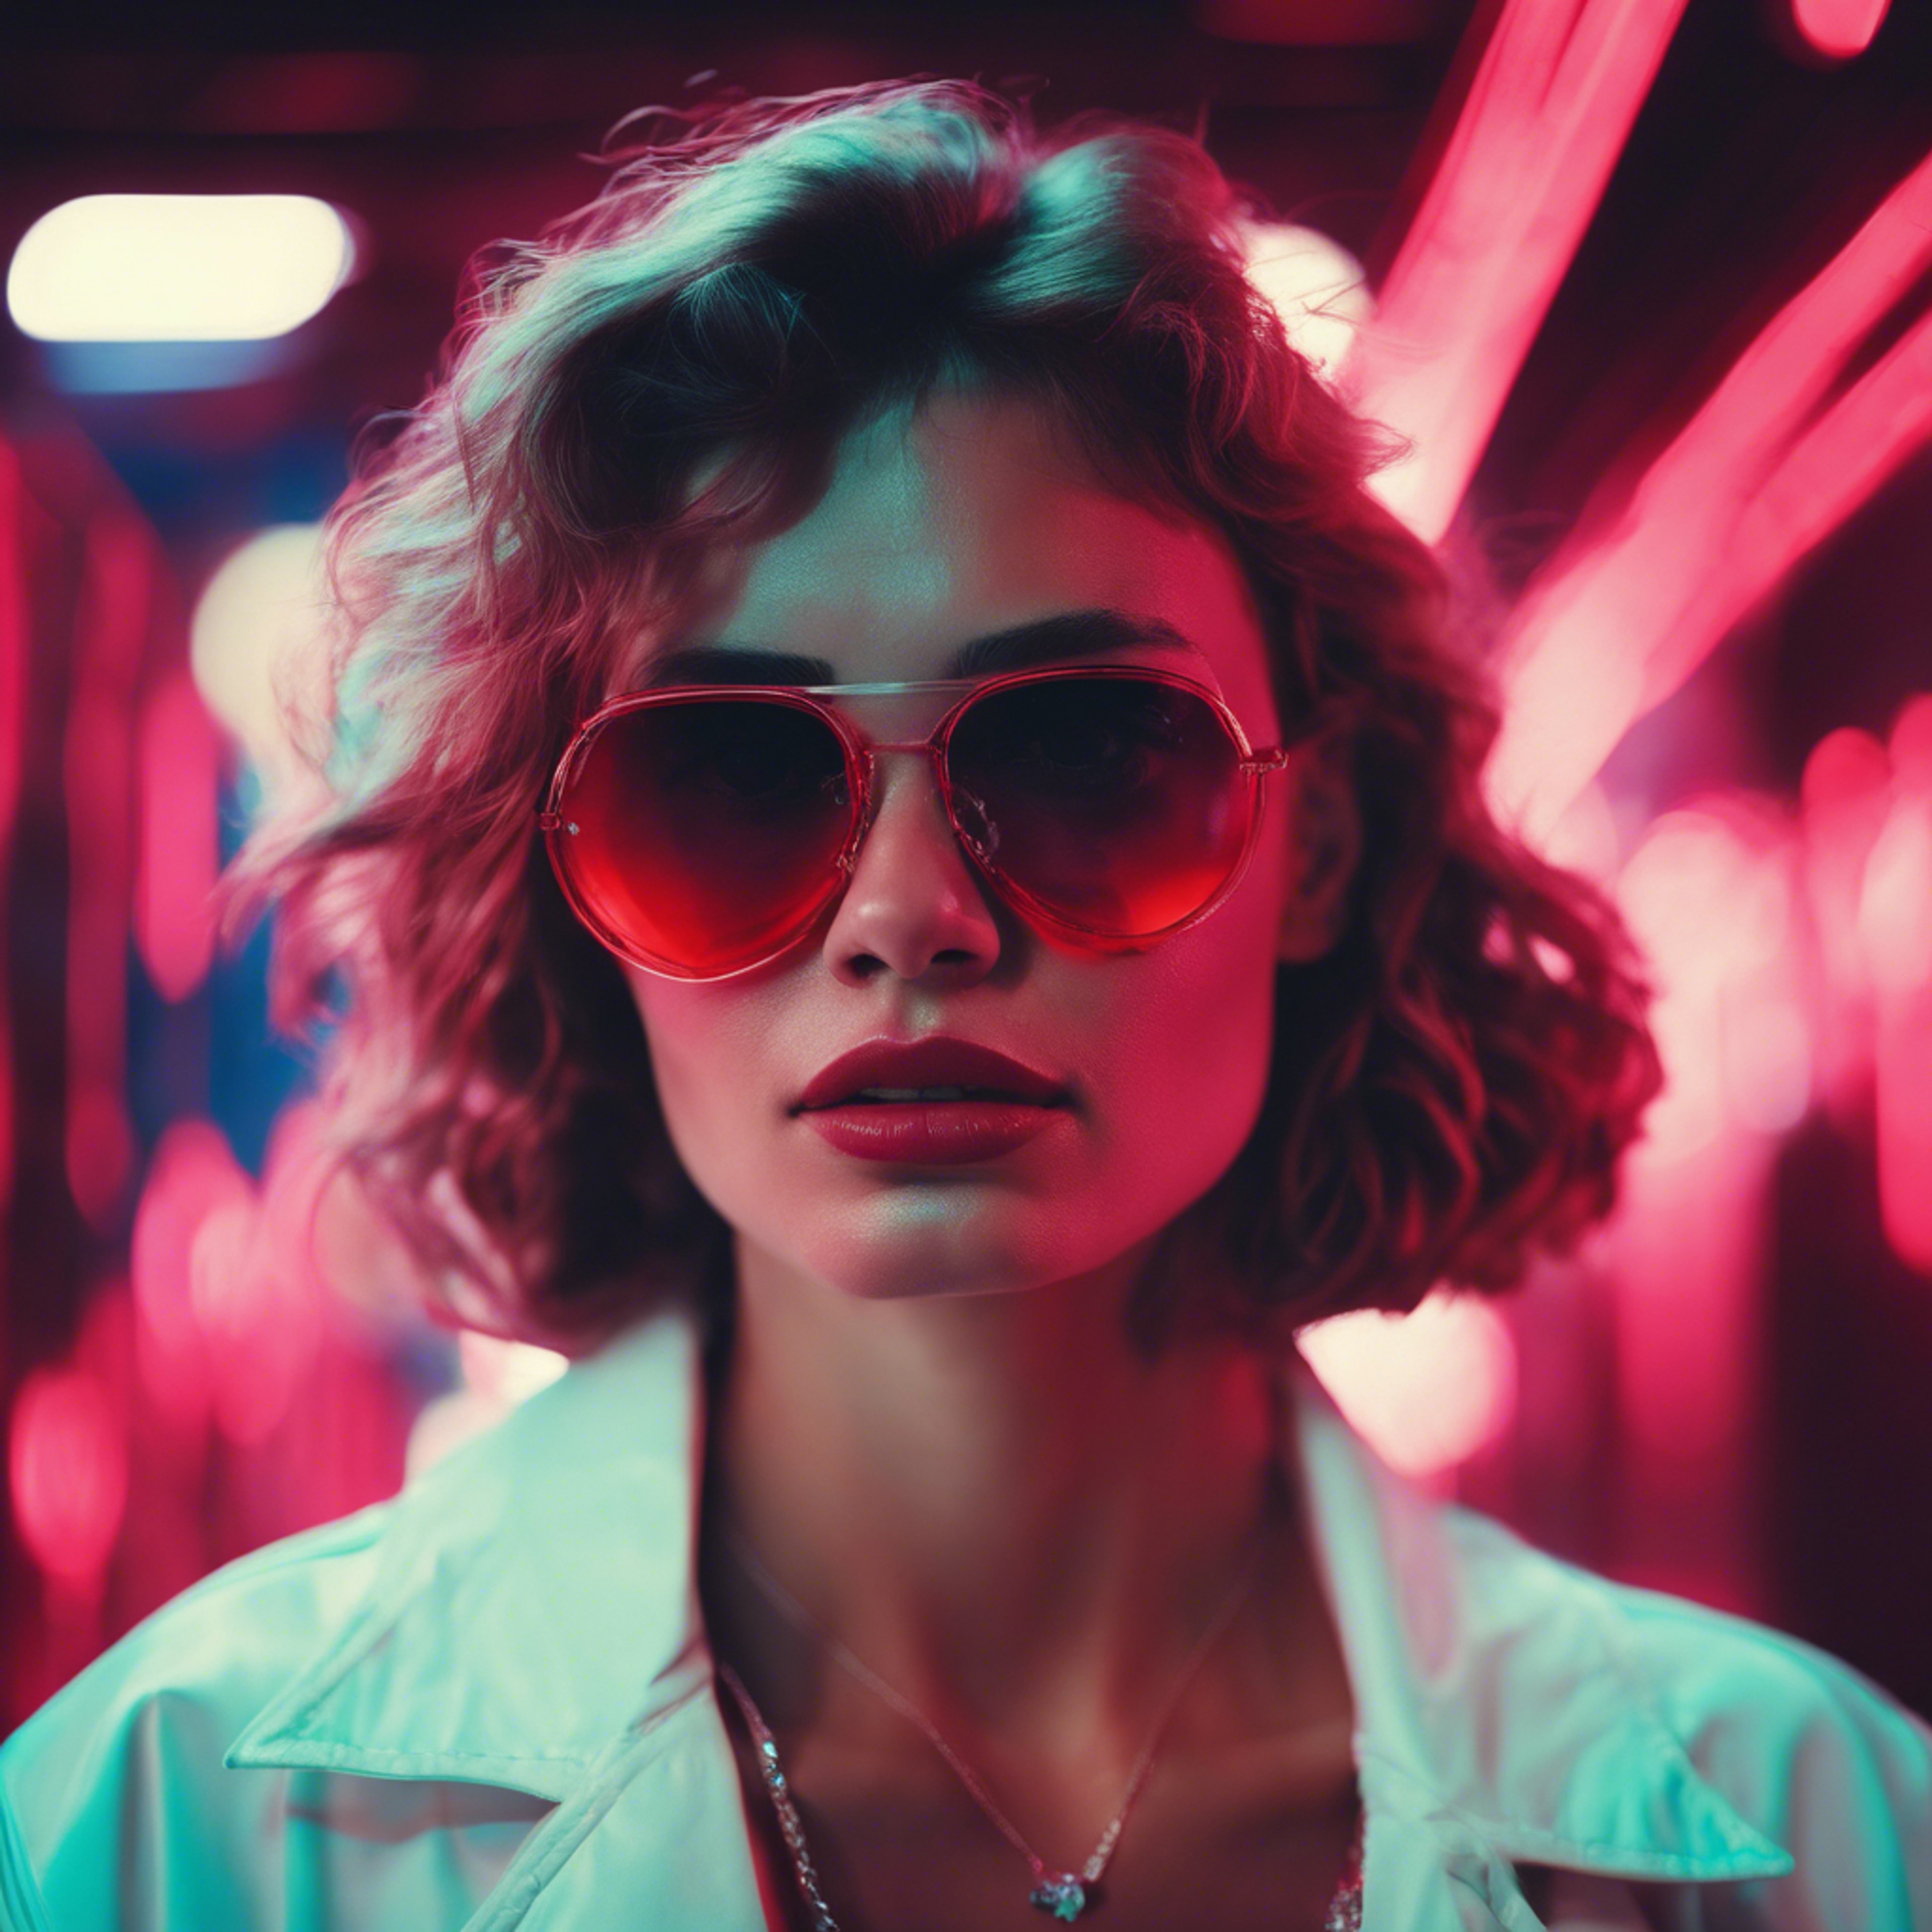 Retro 80's style portrait of a woman in sunglasses lit by cool red neon lights.壁紙[9fb655559f07479e9c29]